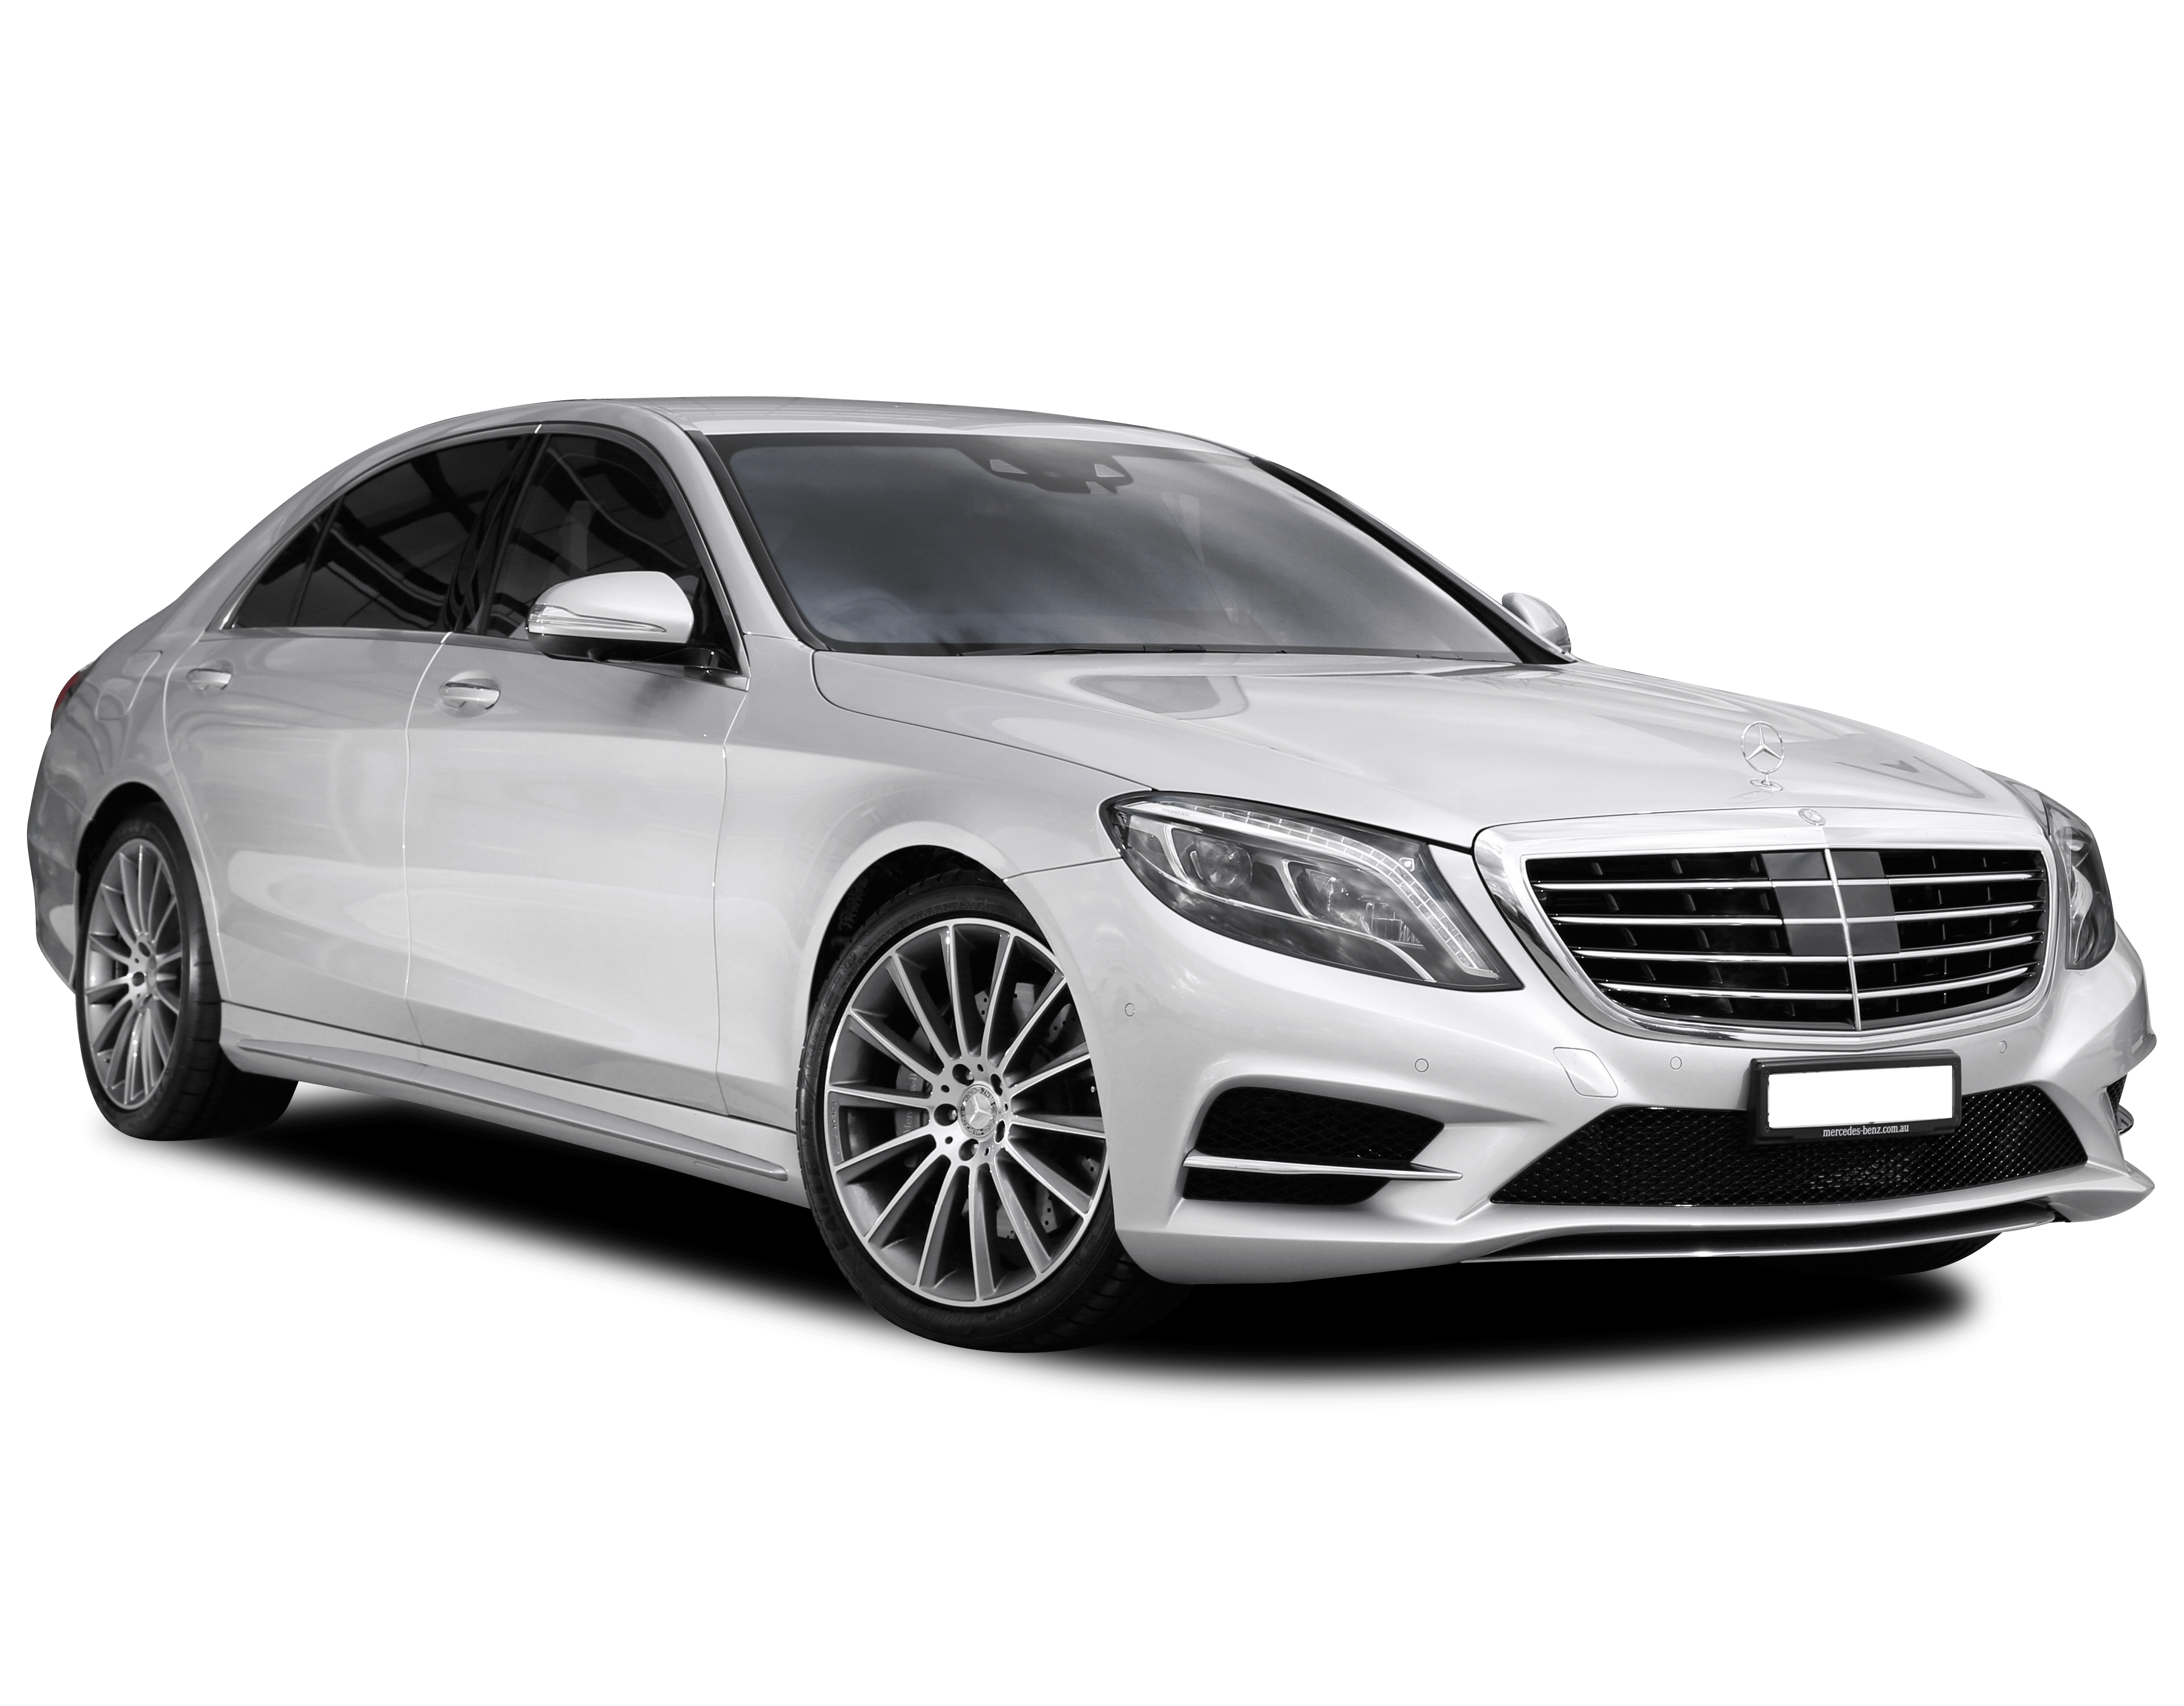 Mercedes S Class Review For Sale Models Specs News In Australia Carsguide